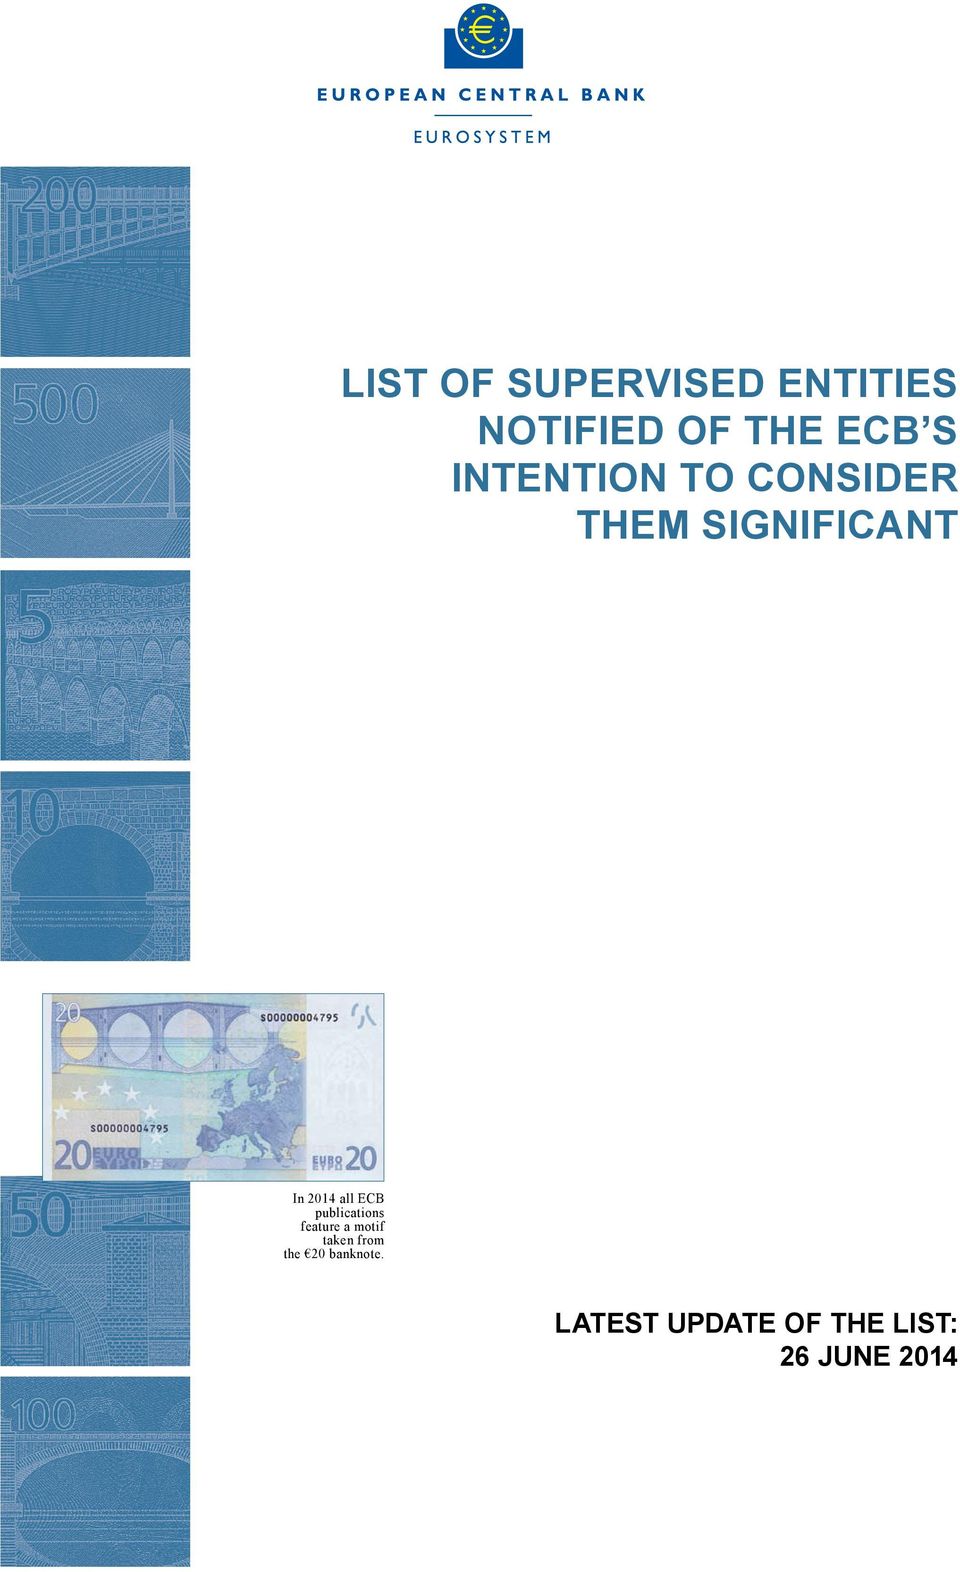 ECB publications feature a motif taken from the 20